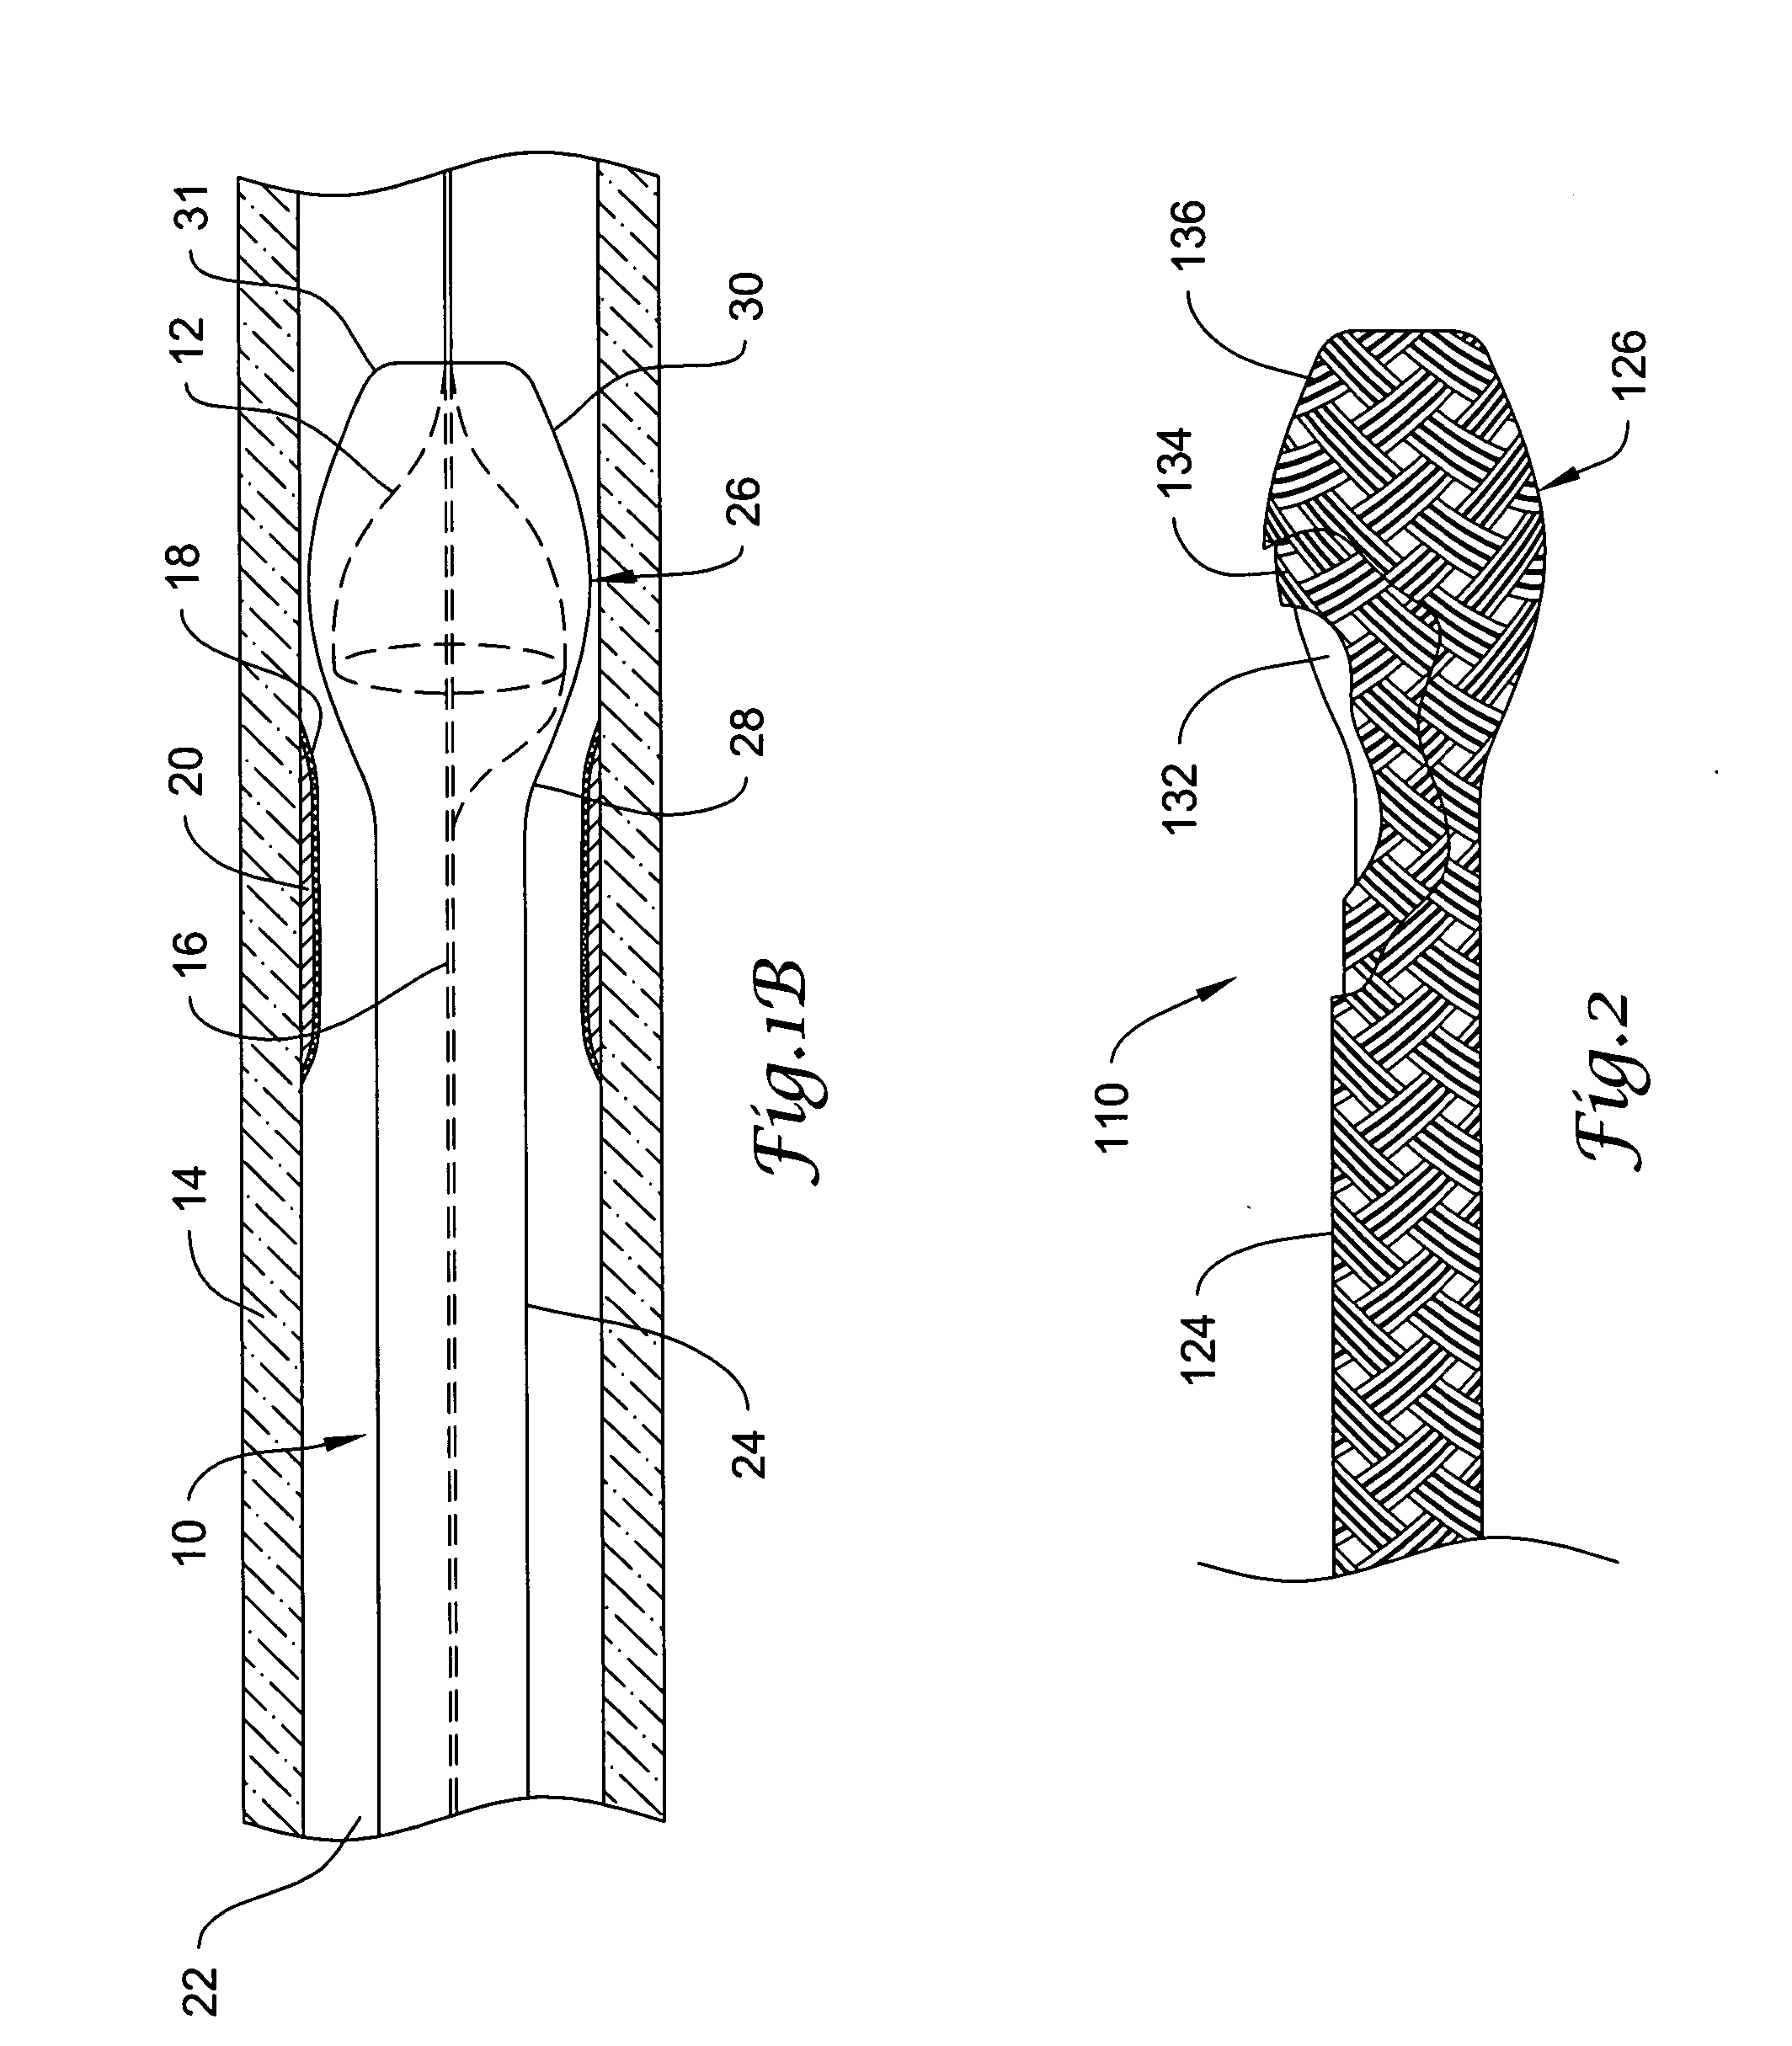 Sheath for use with an embolic protection filtering device